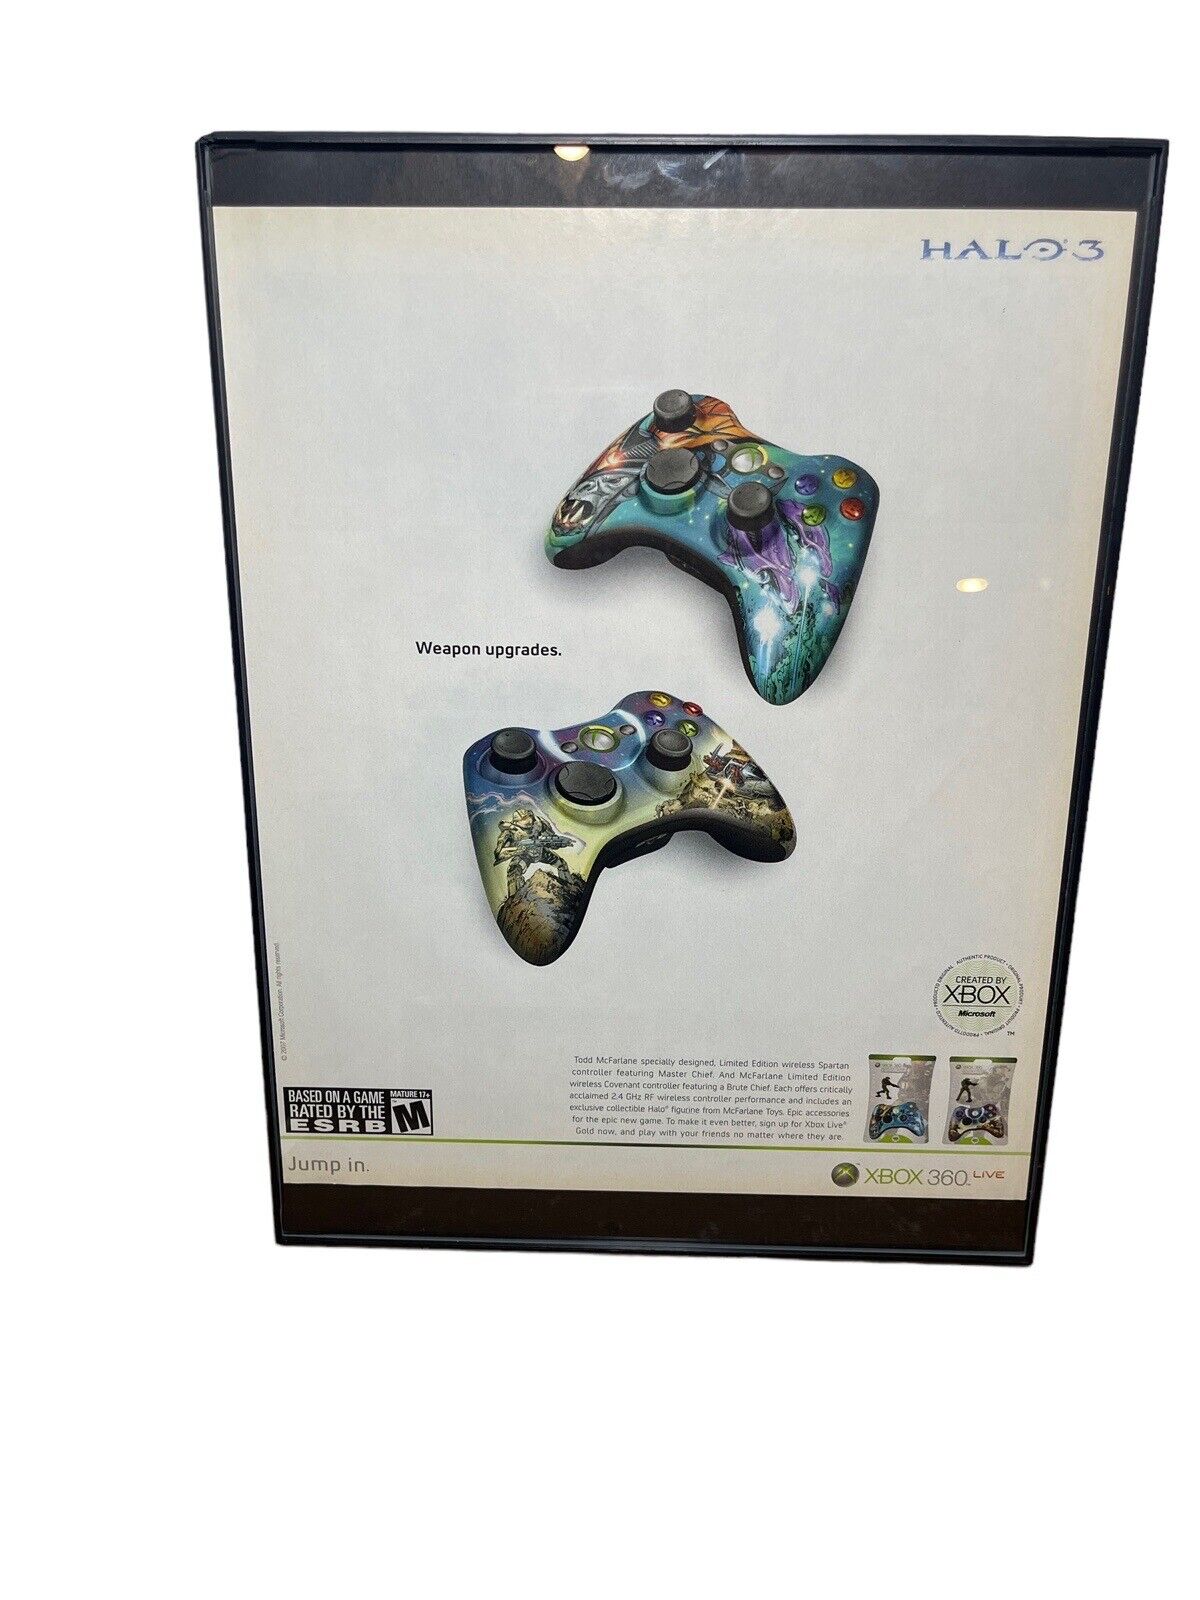 Halo 3 Todd McFarlane Limited Edition Controllers Video Game Print Ad Framed